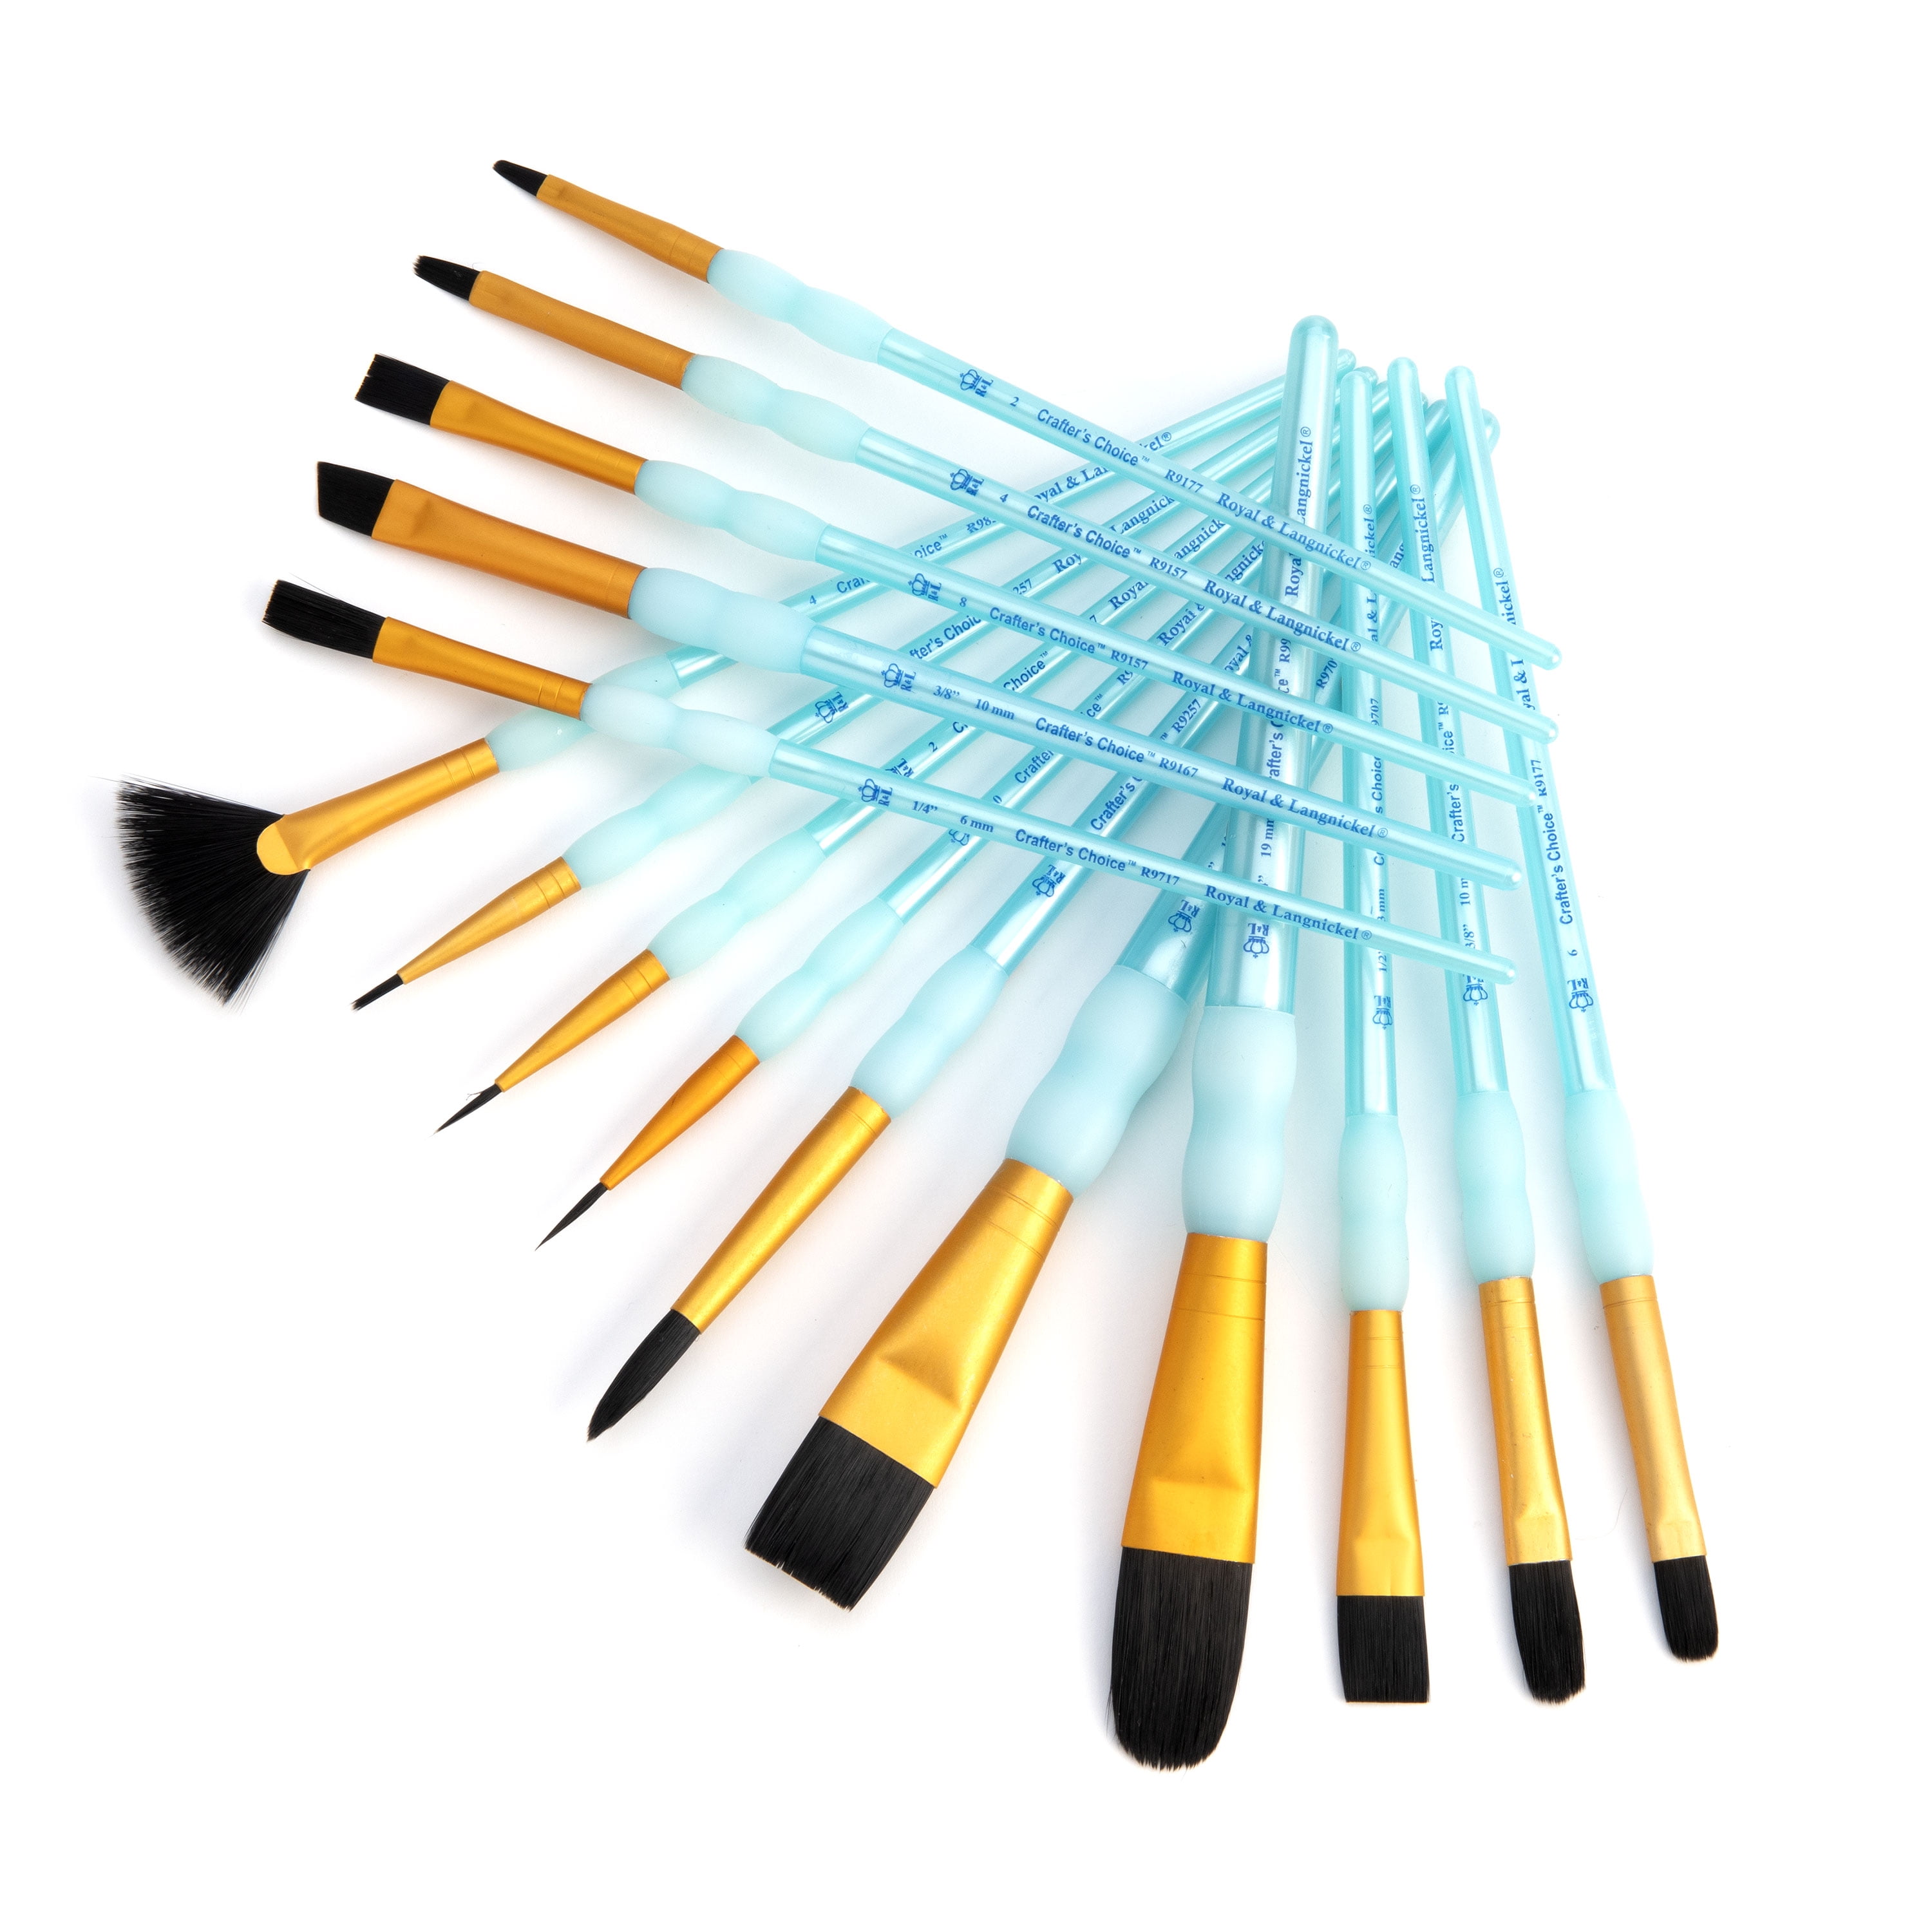 Royal & Langnickel Crafter's Choice Synthetic Black Taklon Paint Brushes,  15pc